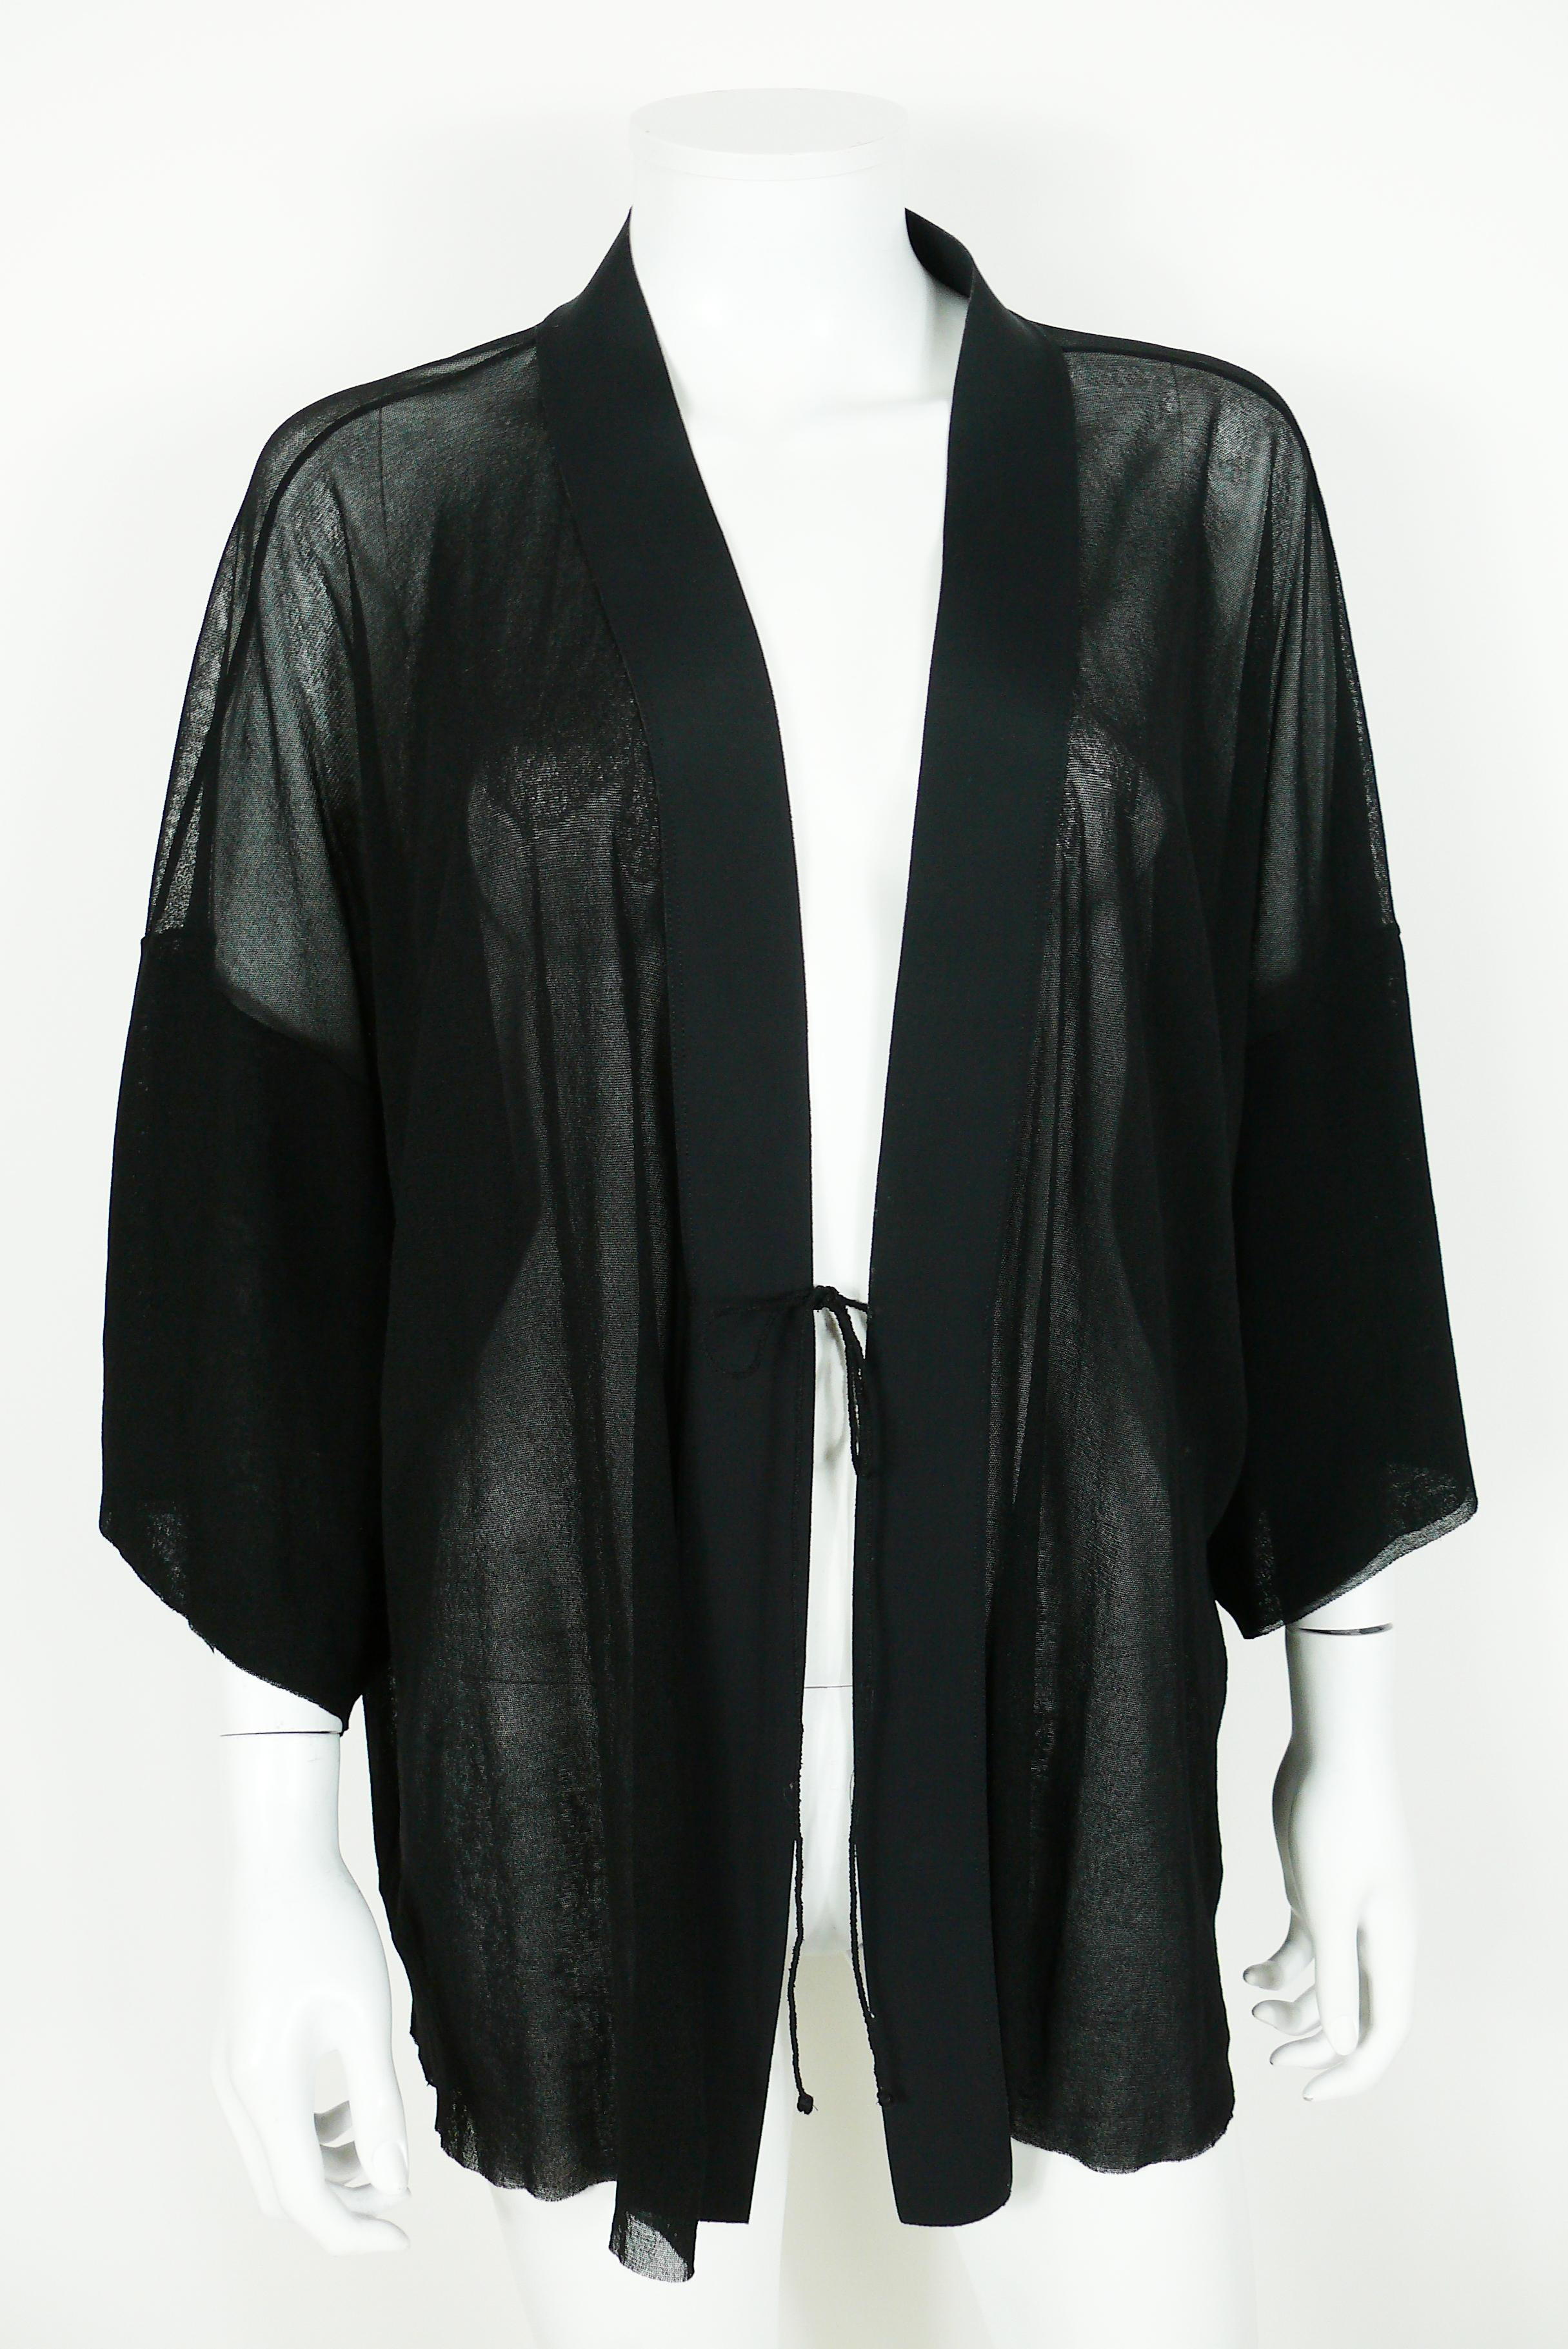 JEAN PAUL GAULTIER vintage black sheer mesh kimono blouse featuring a flocked design on the back 